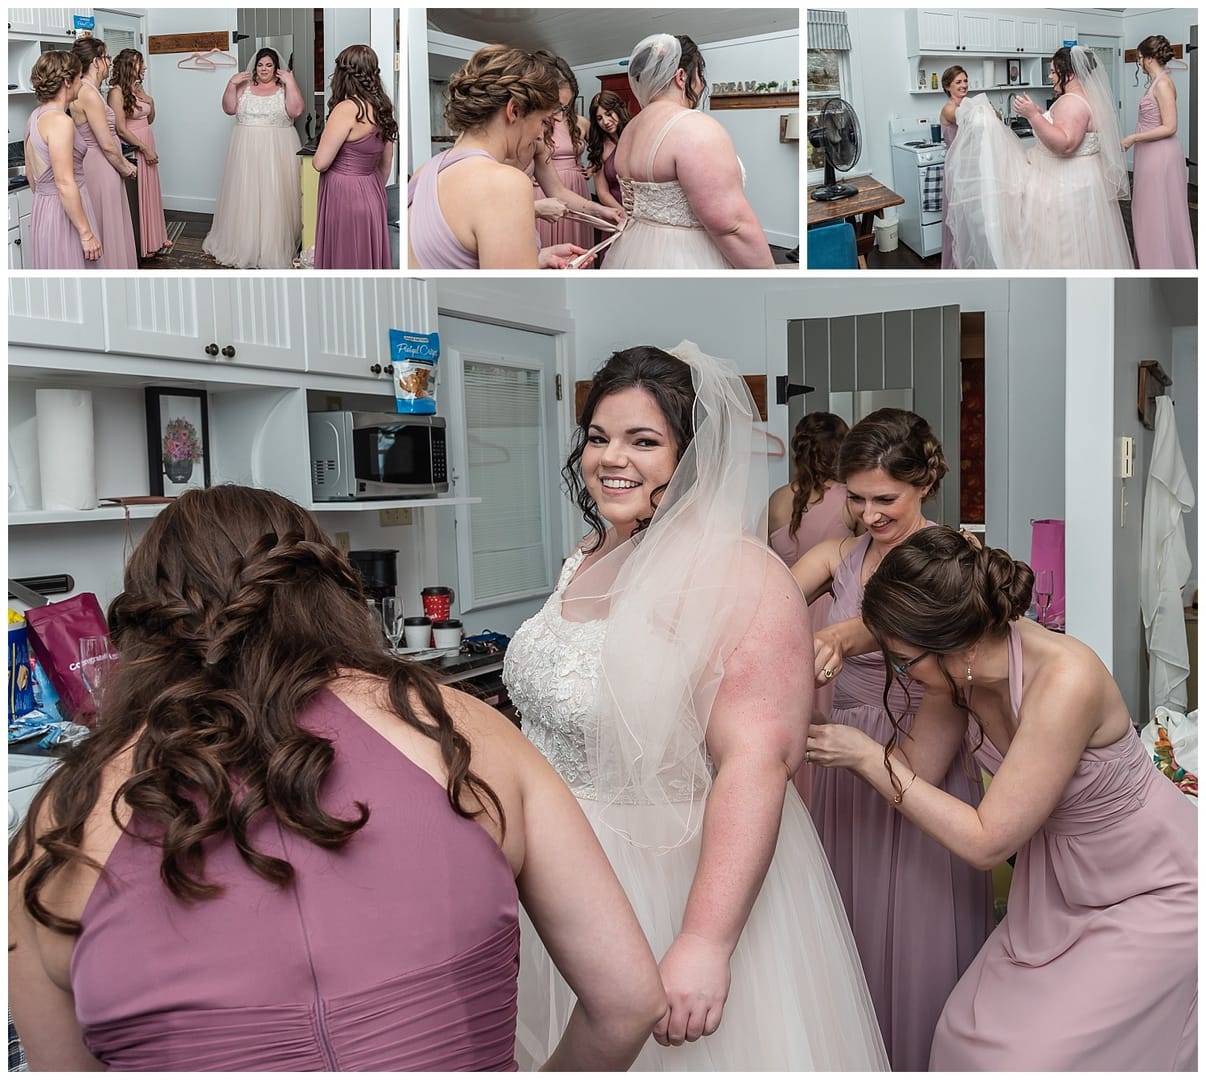 The bride gets her wedding dress laced up by her bridesmaids for her wedding day at the Oceanstone Resort in NS.